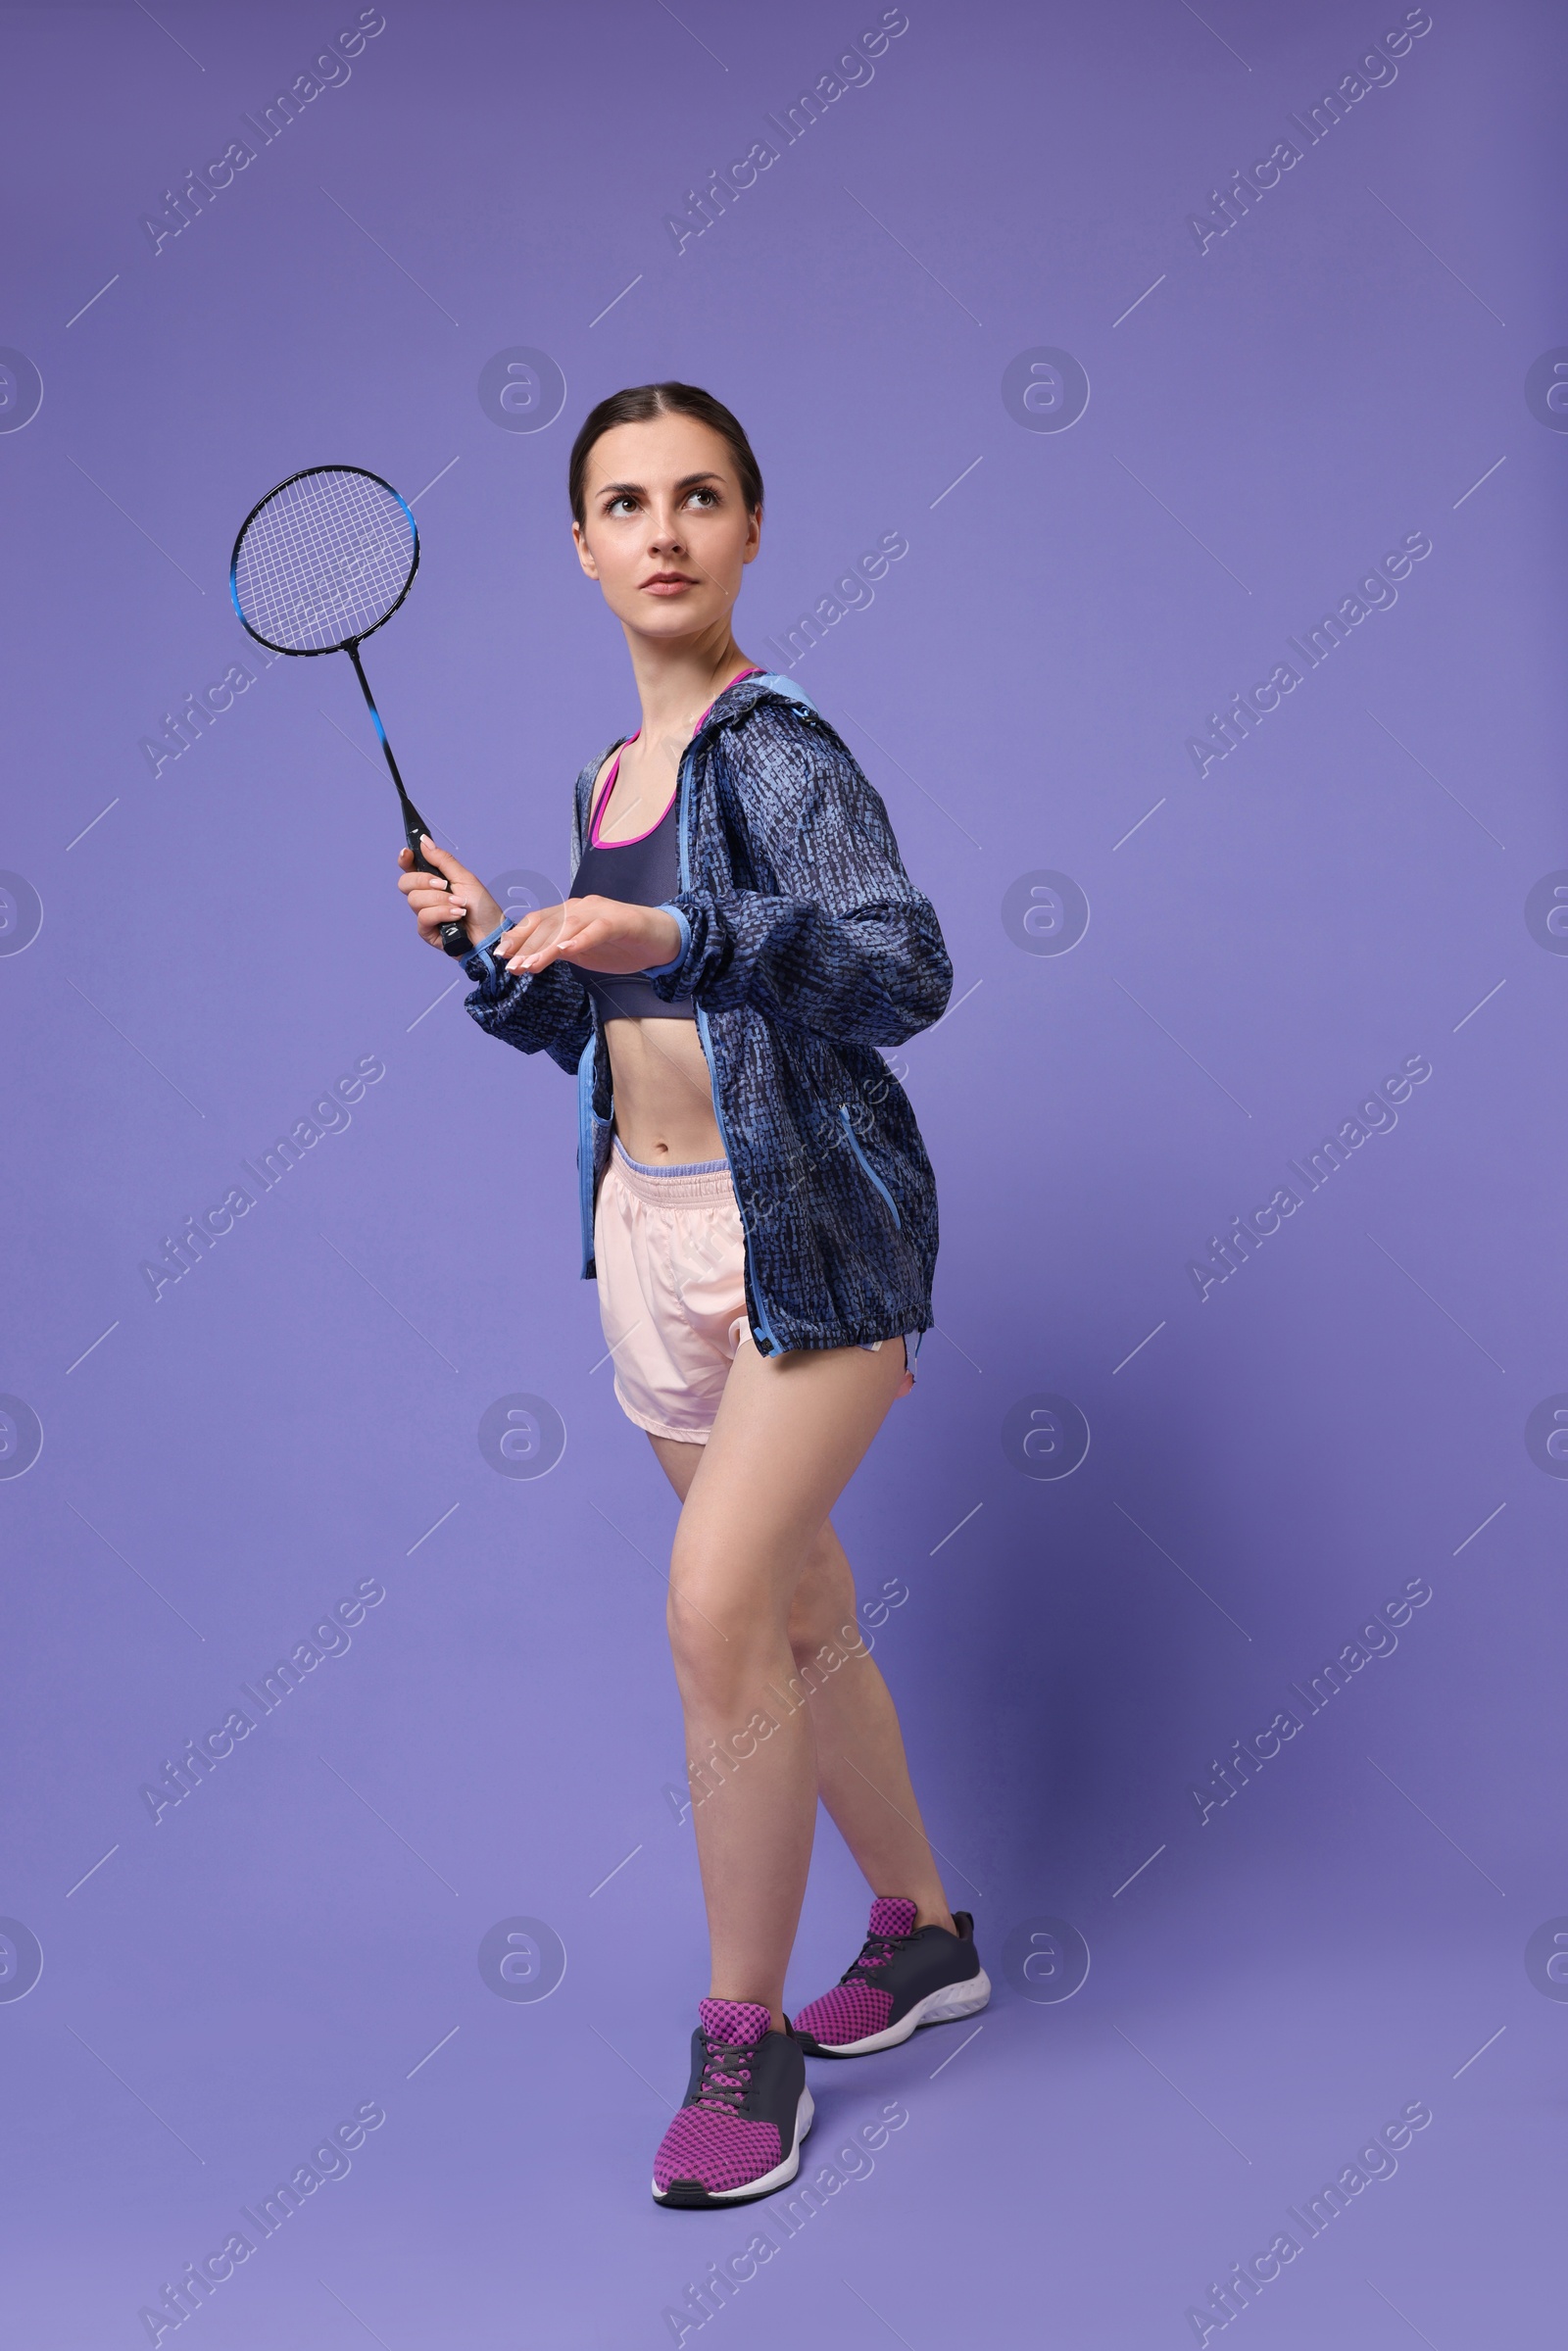 Photo of Young woman playing badminton with racket on purple background